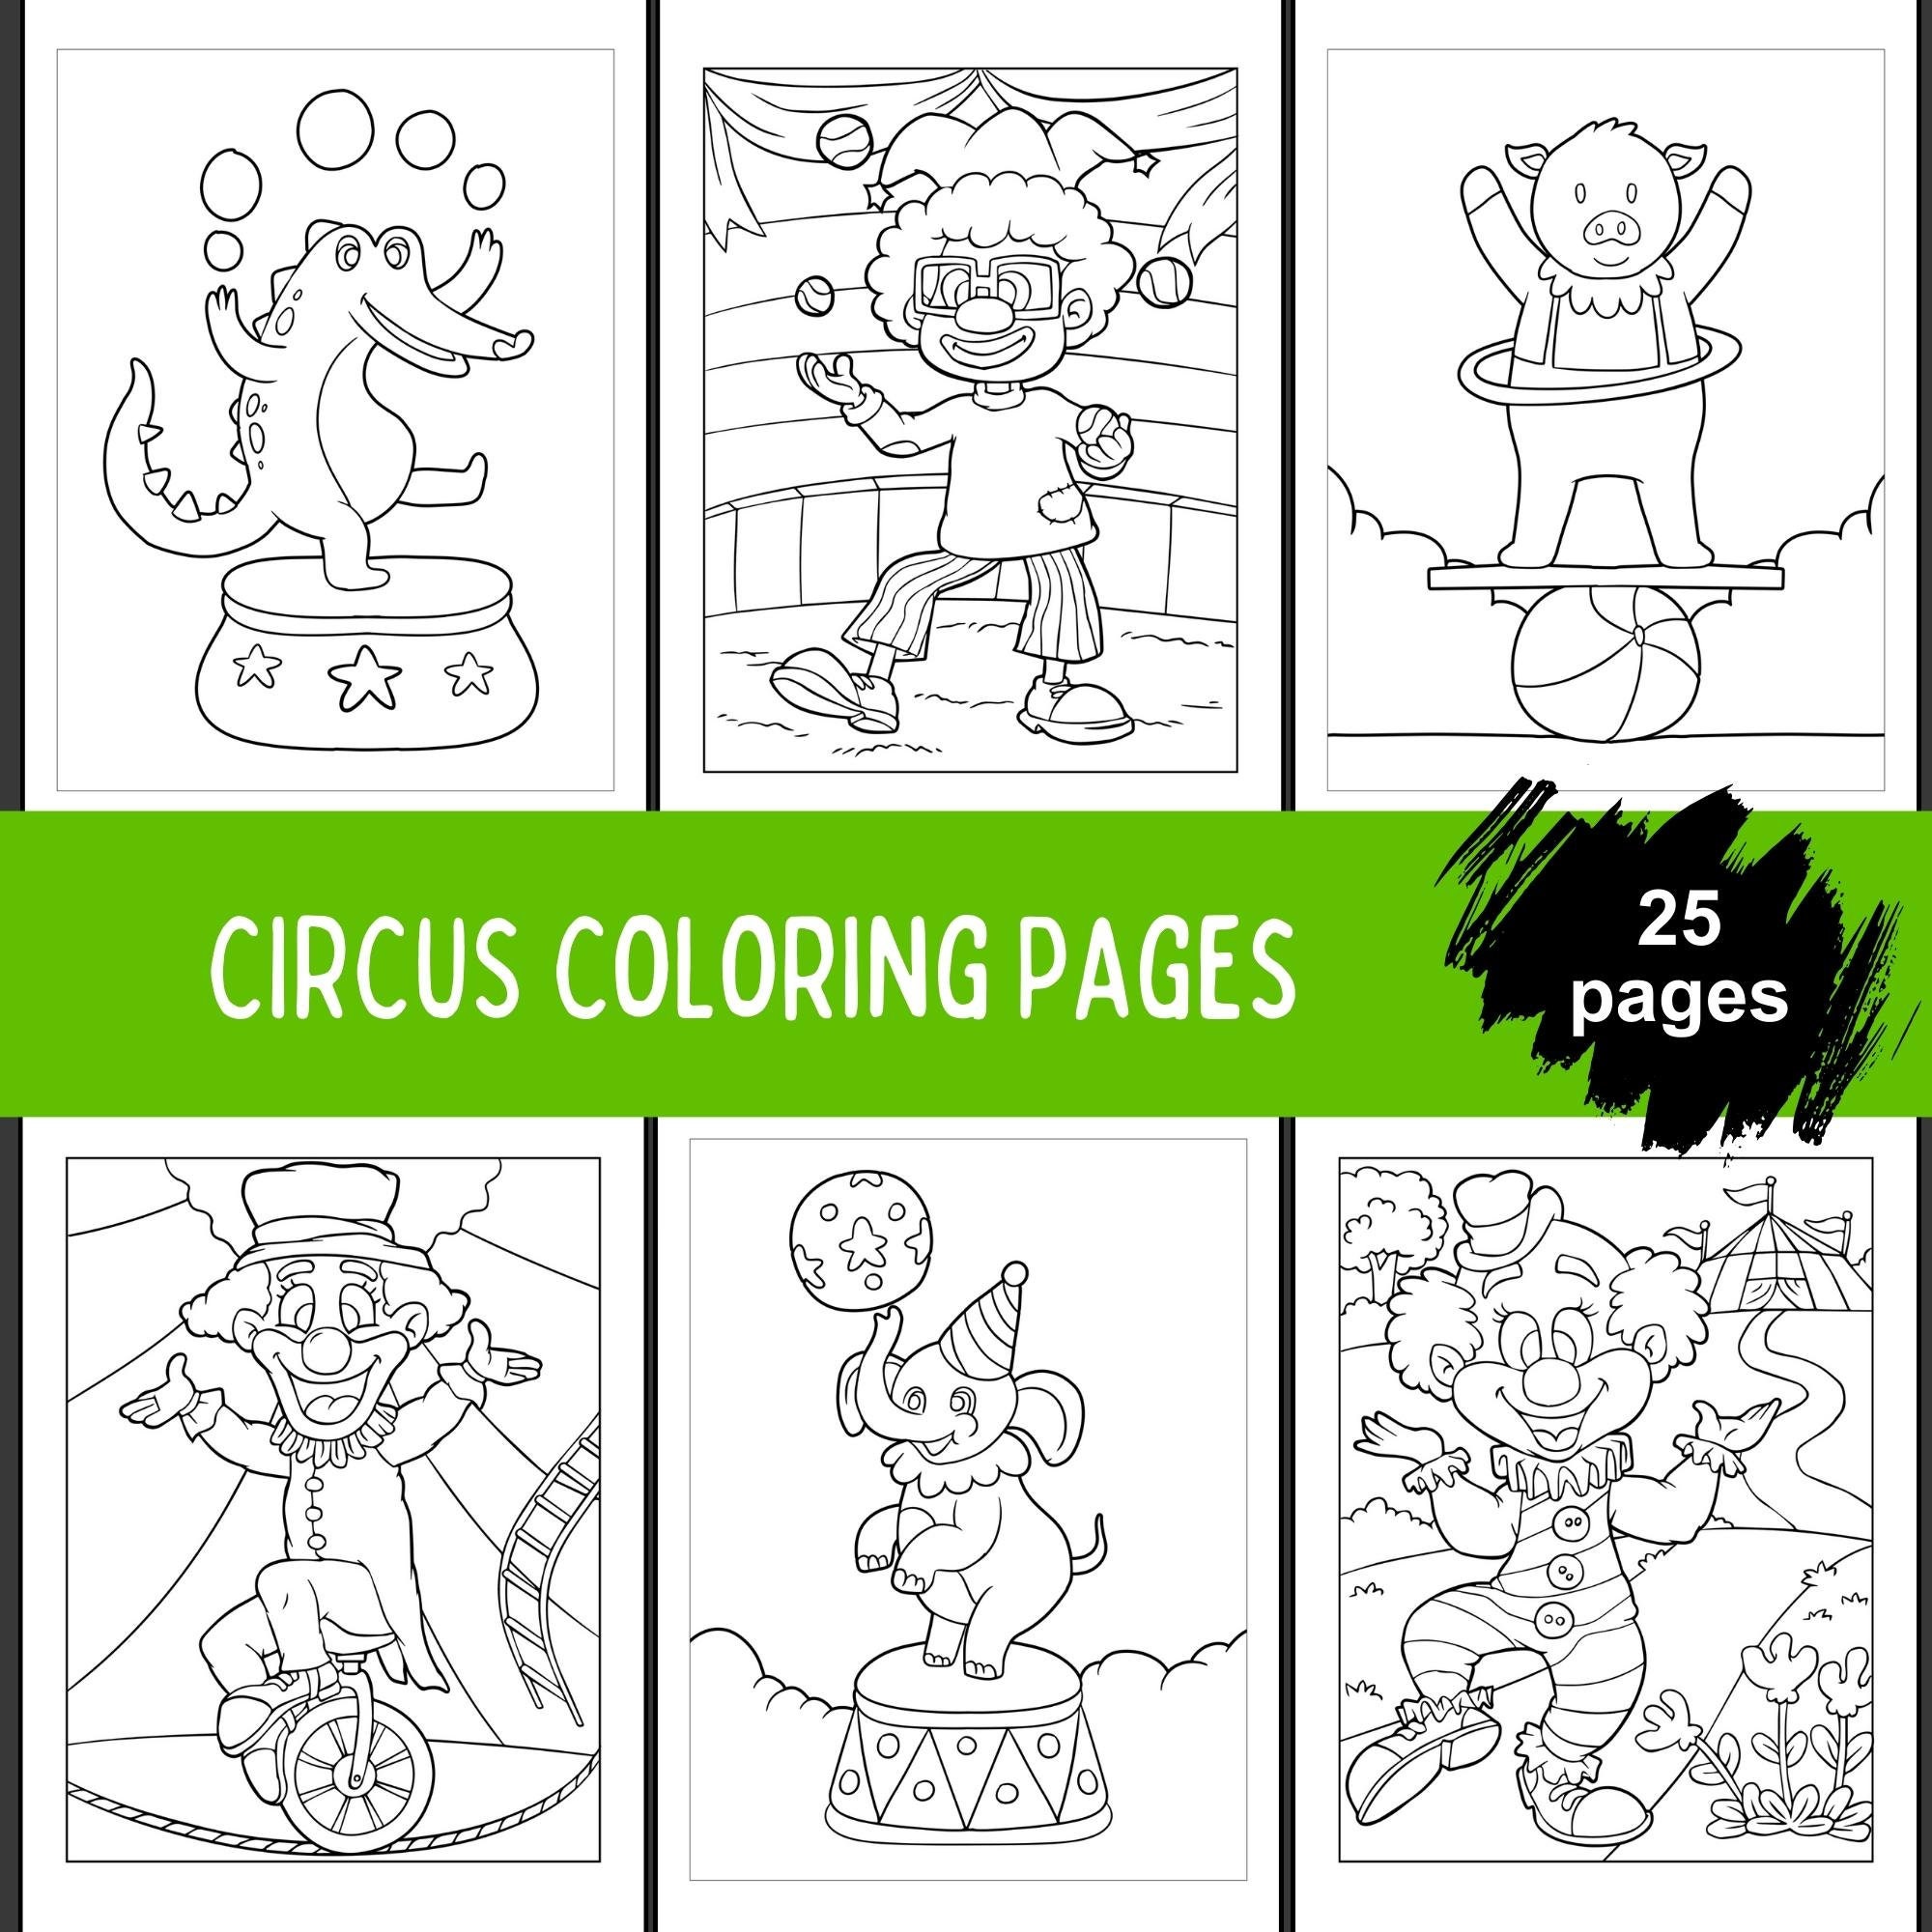 Circus coloring pages for kids clown coloring pages circus